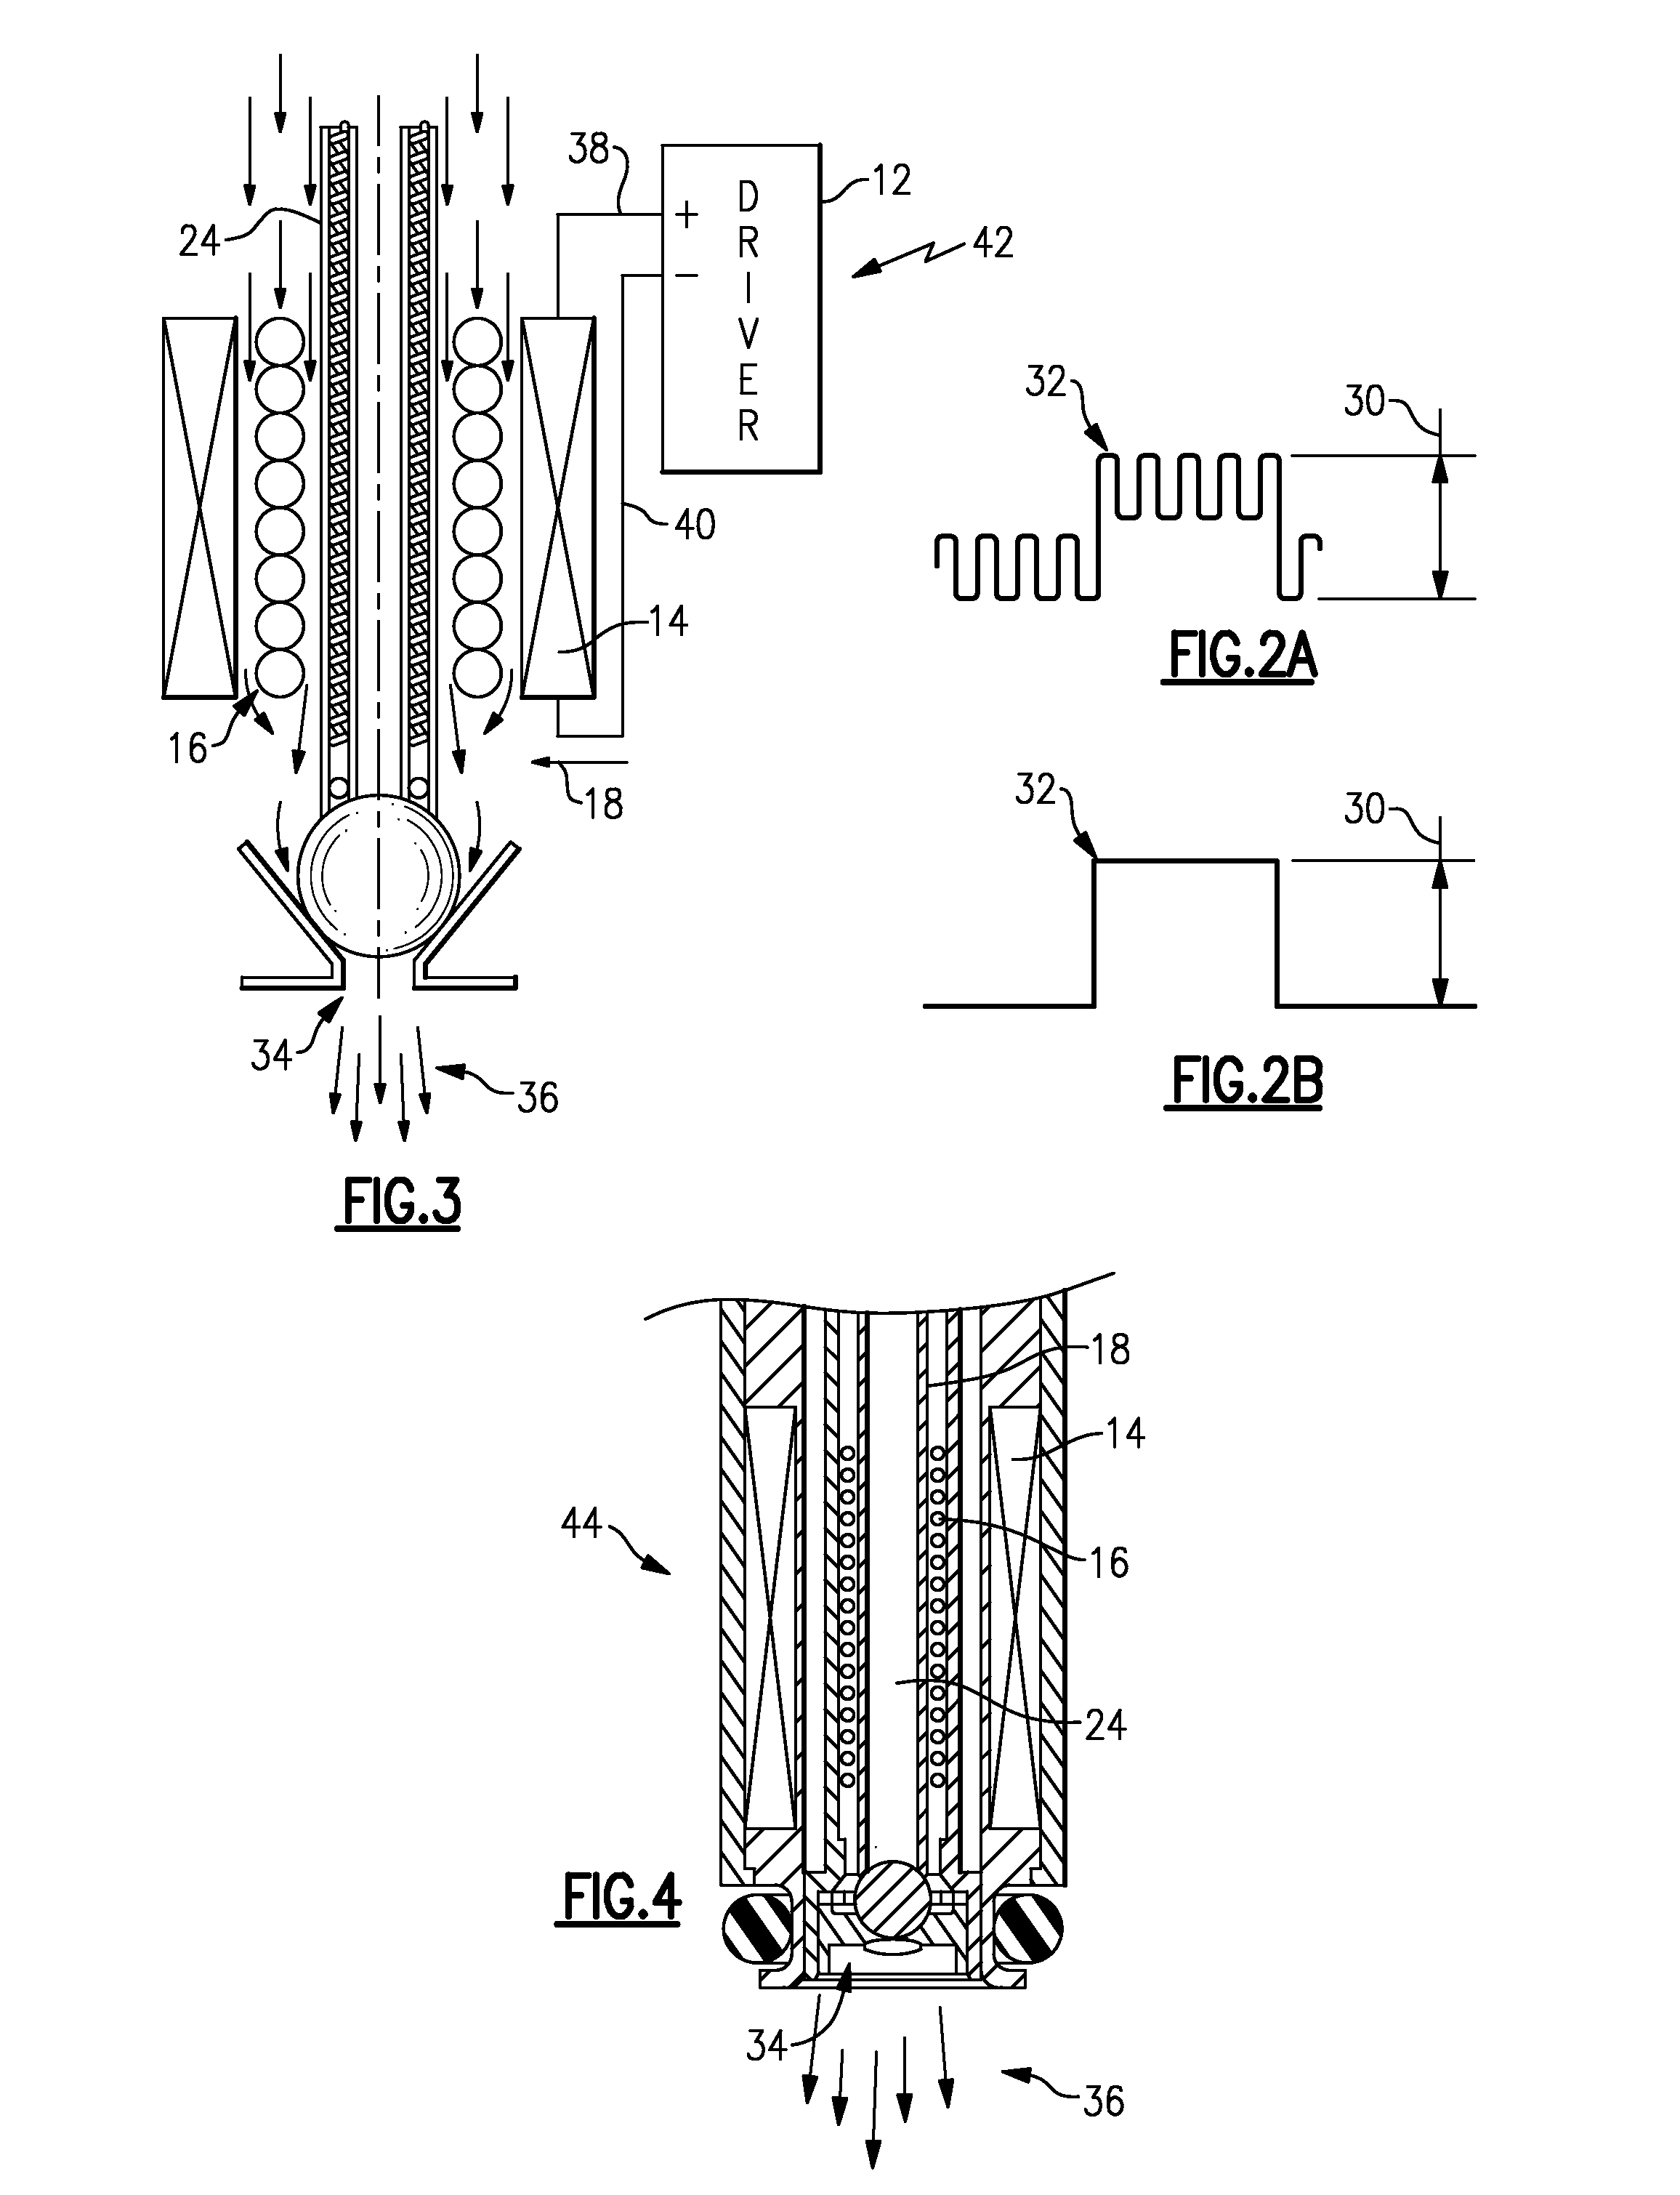 Inductive heated injector using voltage transformer technology